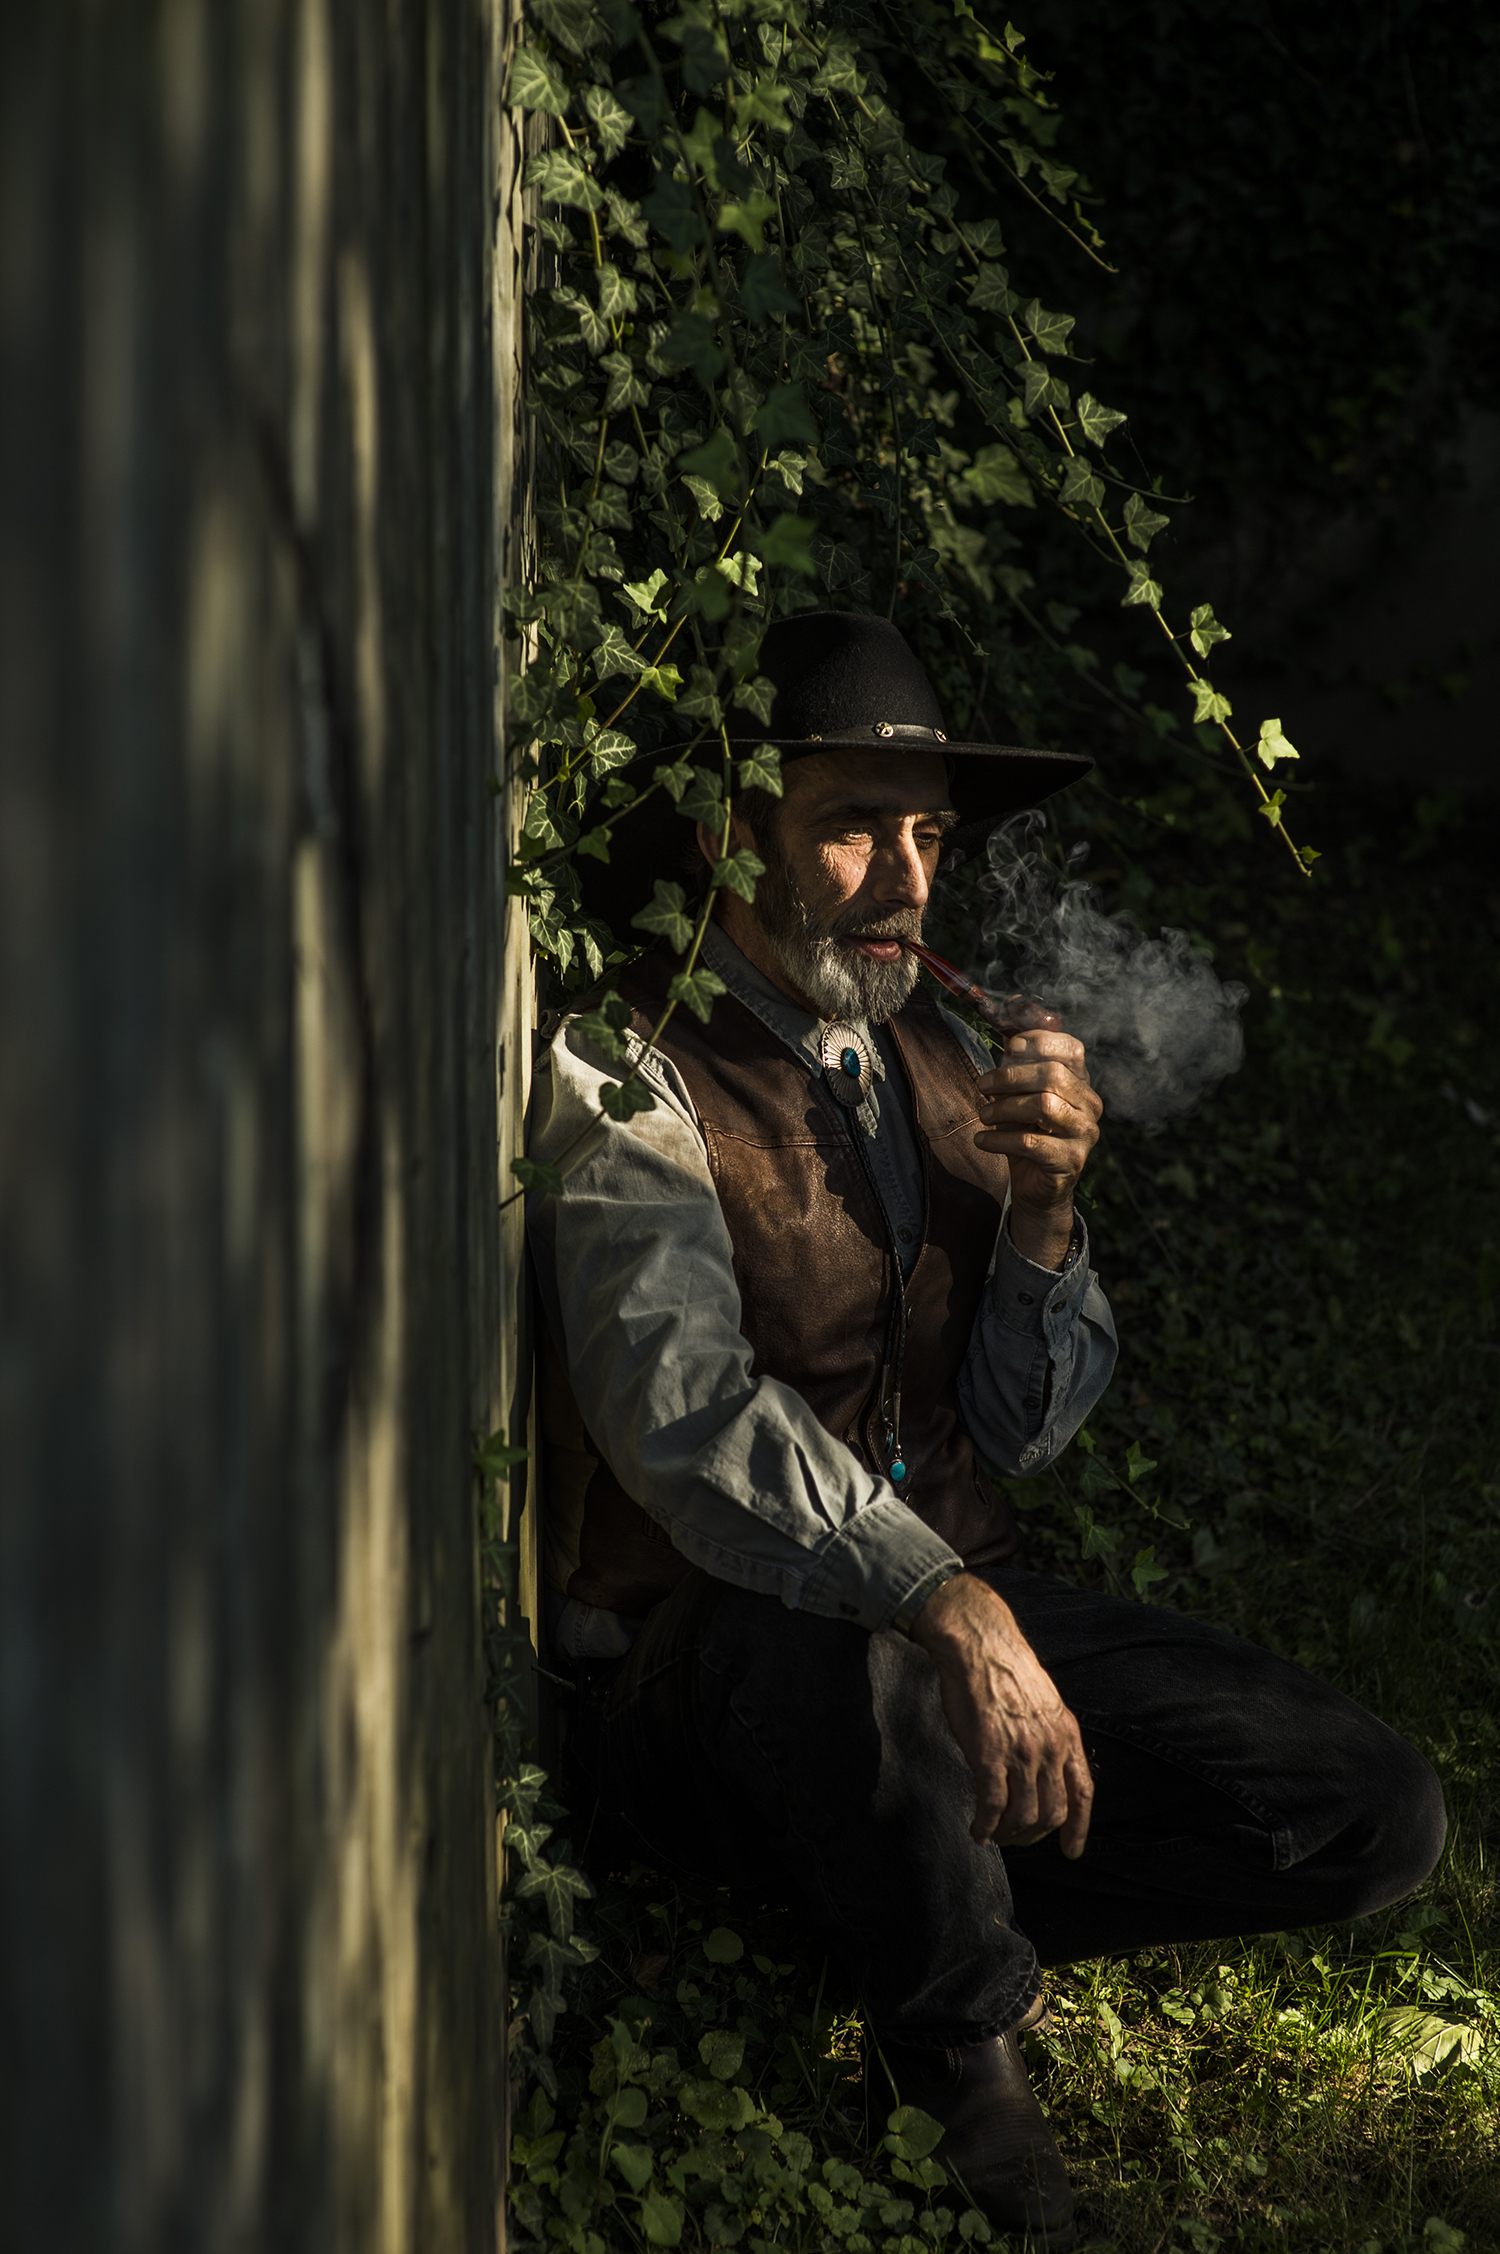 Man in cowboy garb leans against a wall smoking a pipe